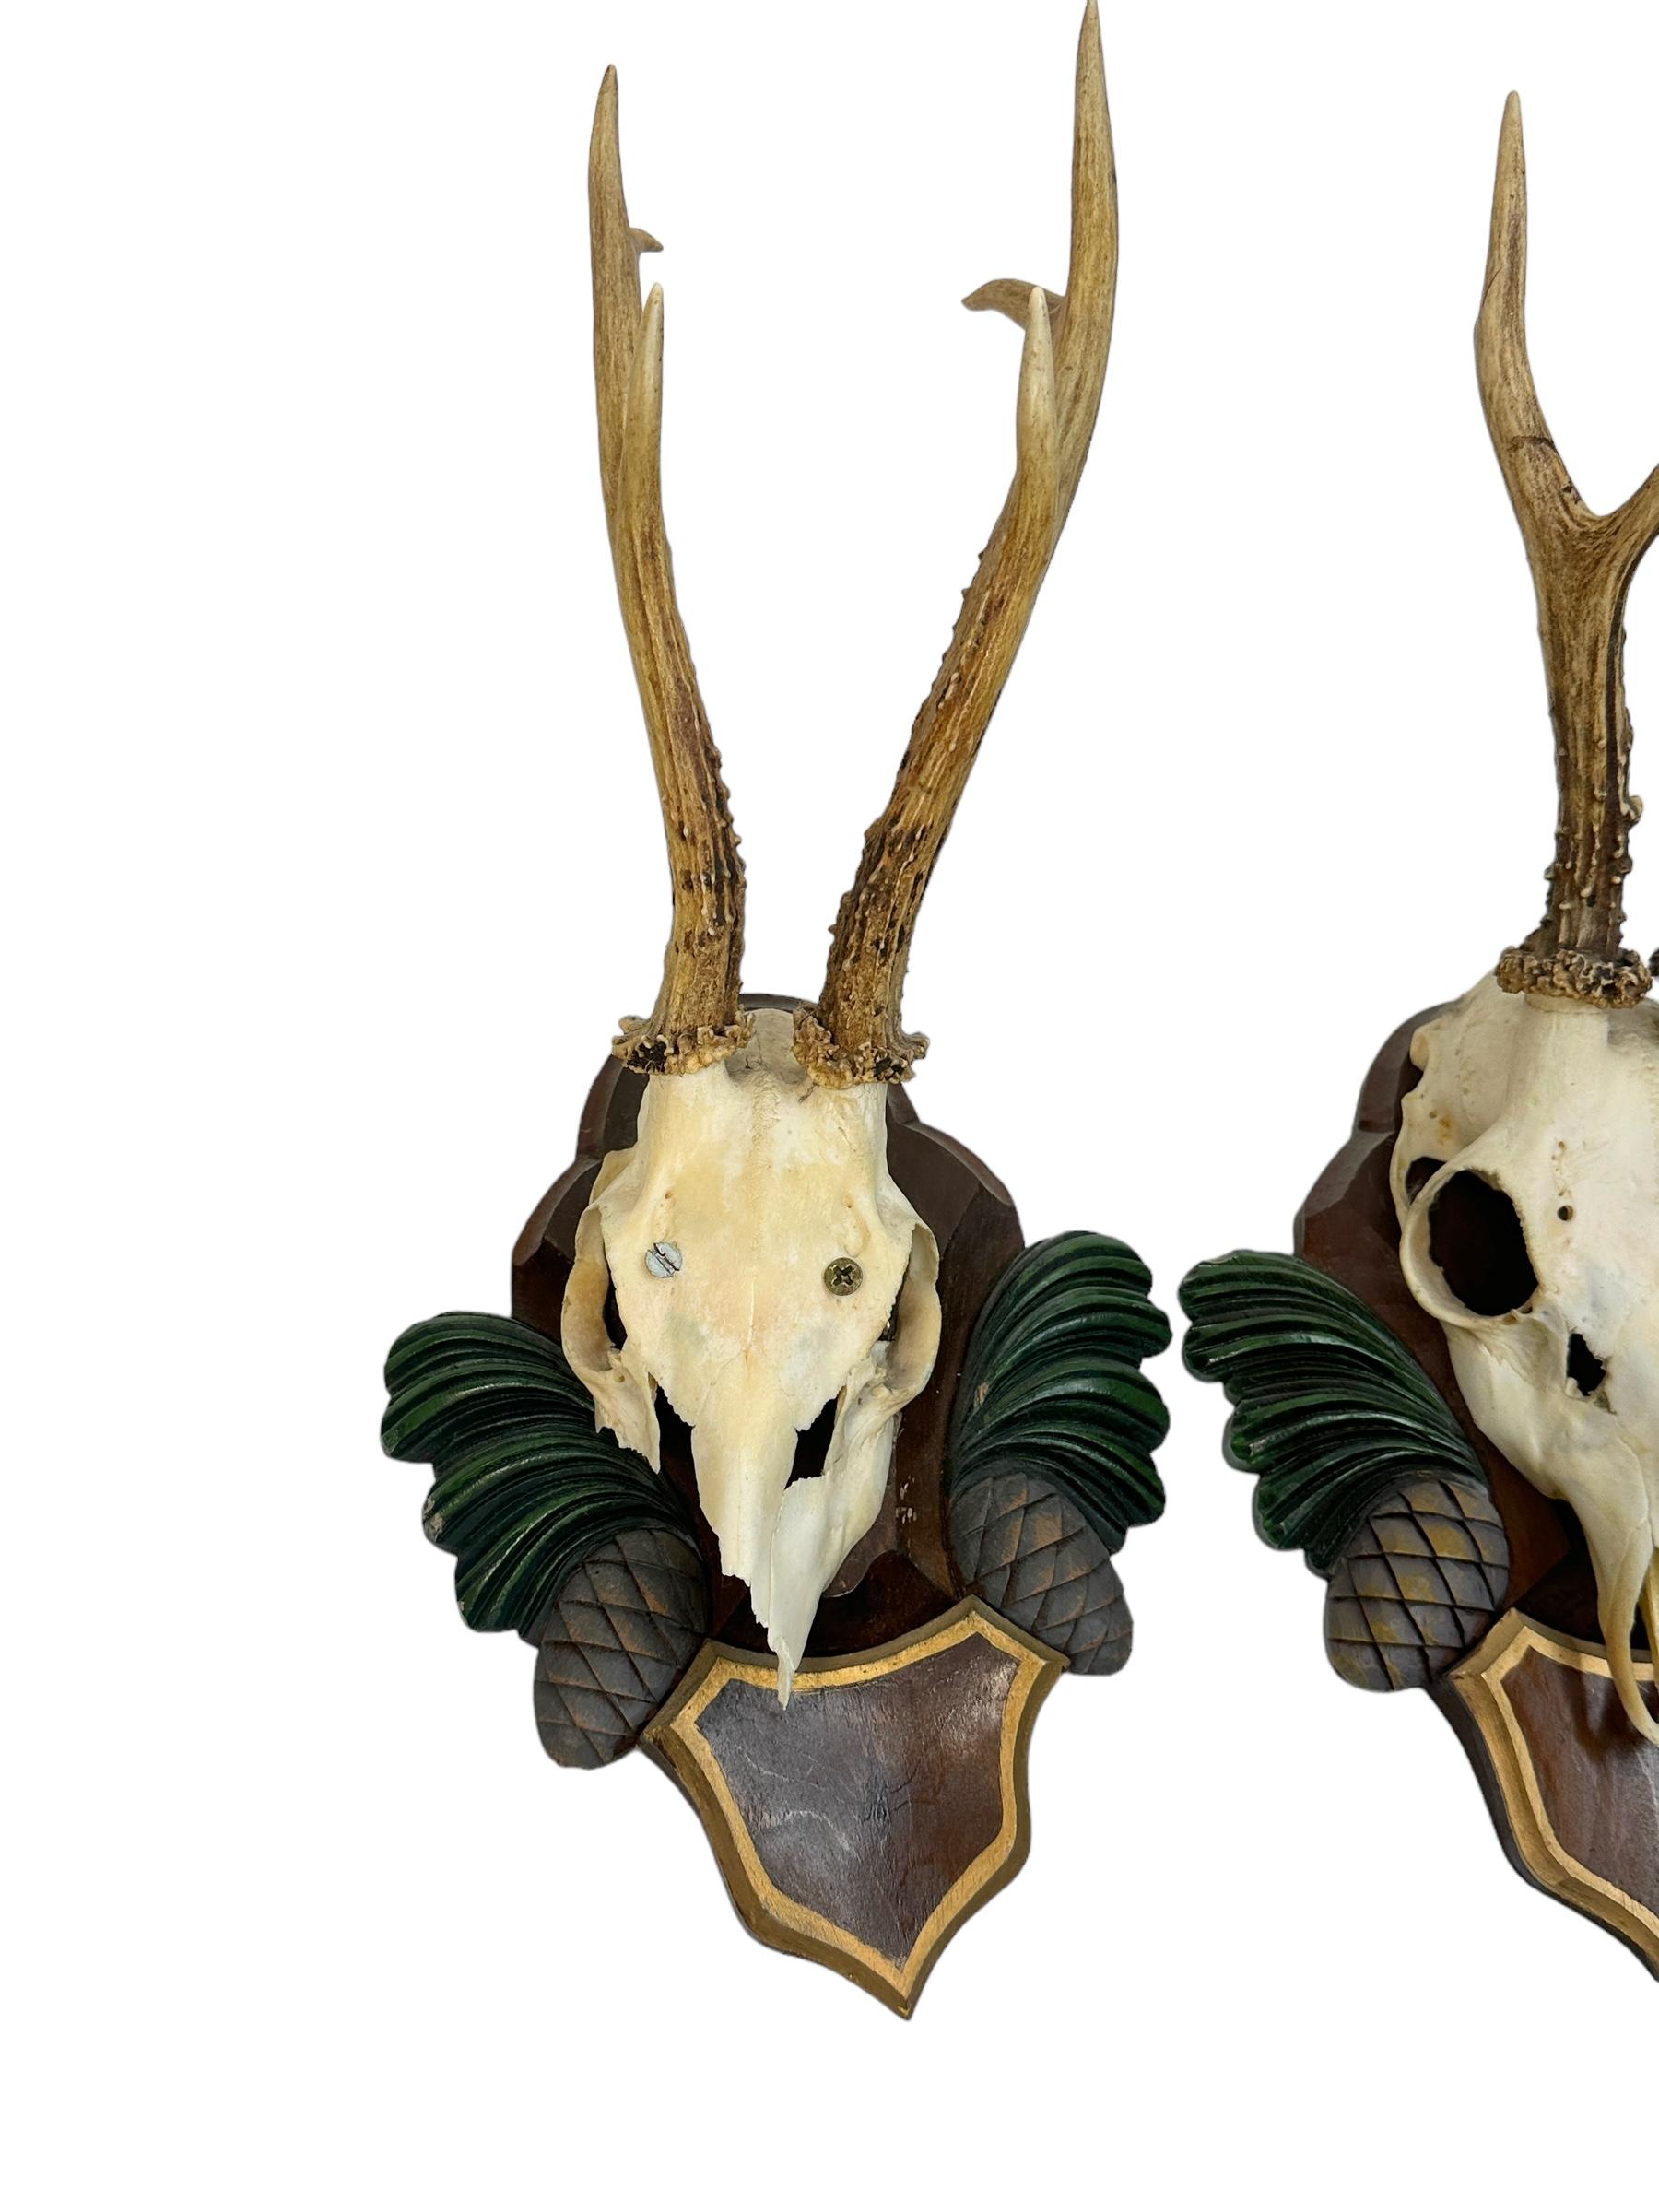 A set of two antique Black Forest deer antler trophies on hand carved, Black Forest wooden plaques. They are not dated. Measurement's given in dimensions section refers to the tallest item. A nice addition to your hunters loge, cabin, man cave or